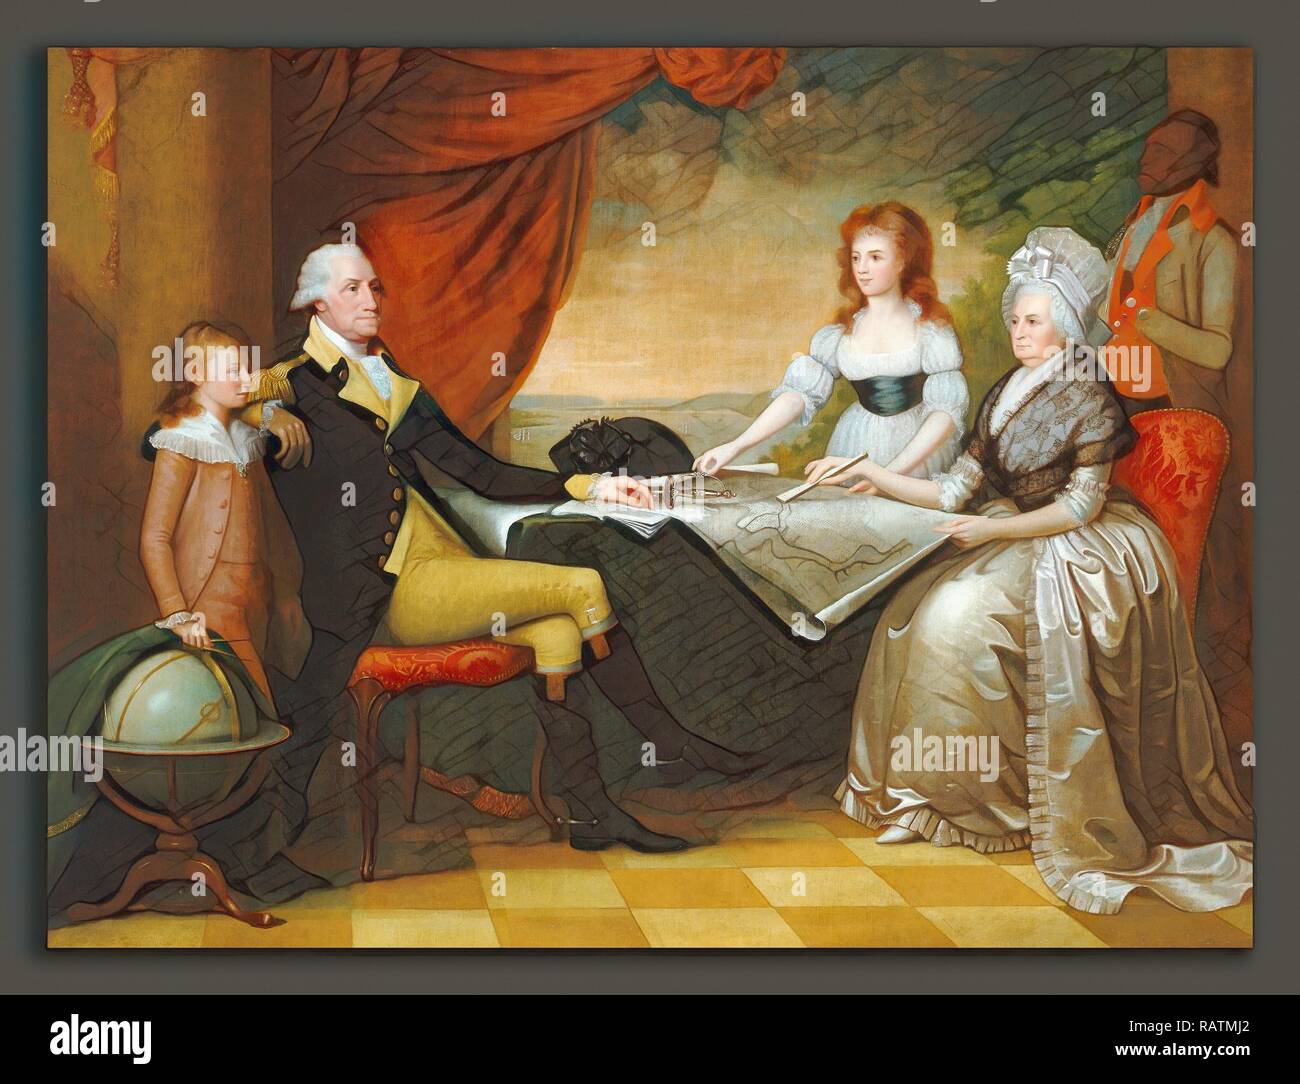 Edward Savage (American, 1761 - 1817), The Washington Family, 1789-1796, oil on canvas. Reimagined by Gibon. Classic reimagined Stock Photo